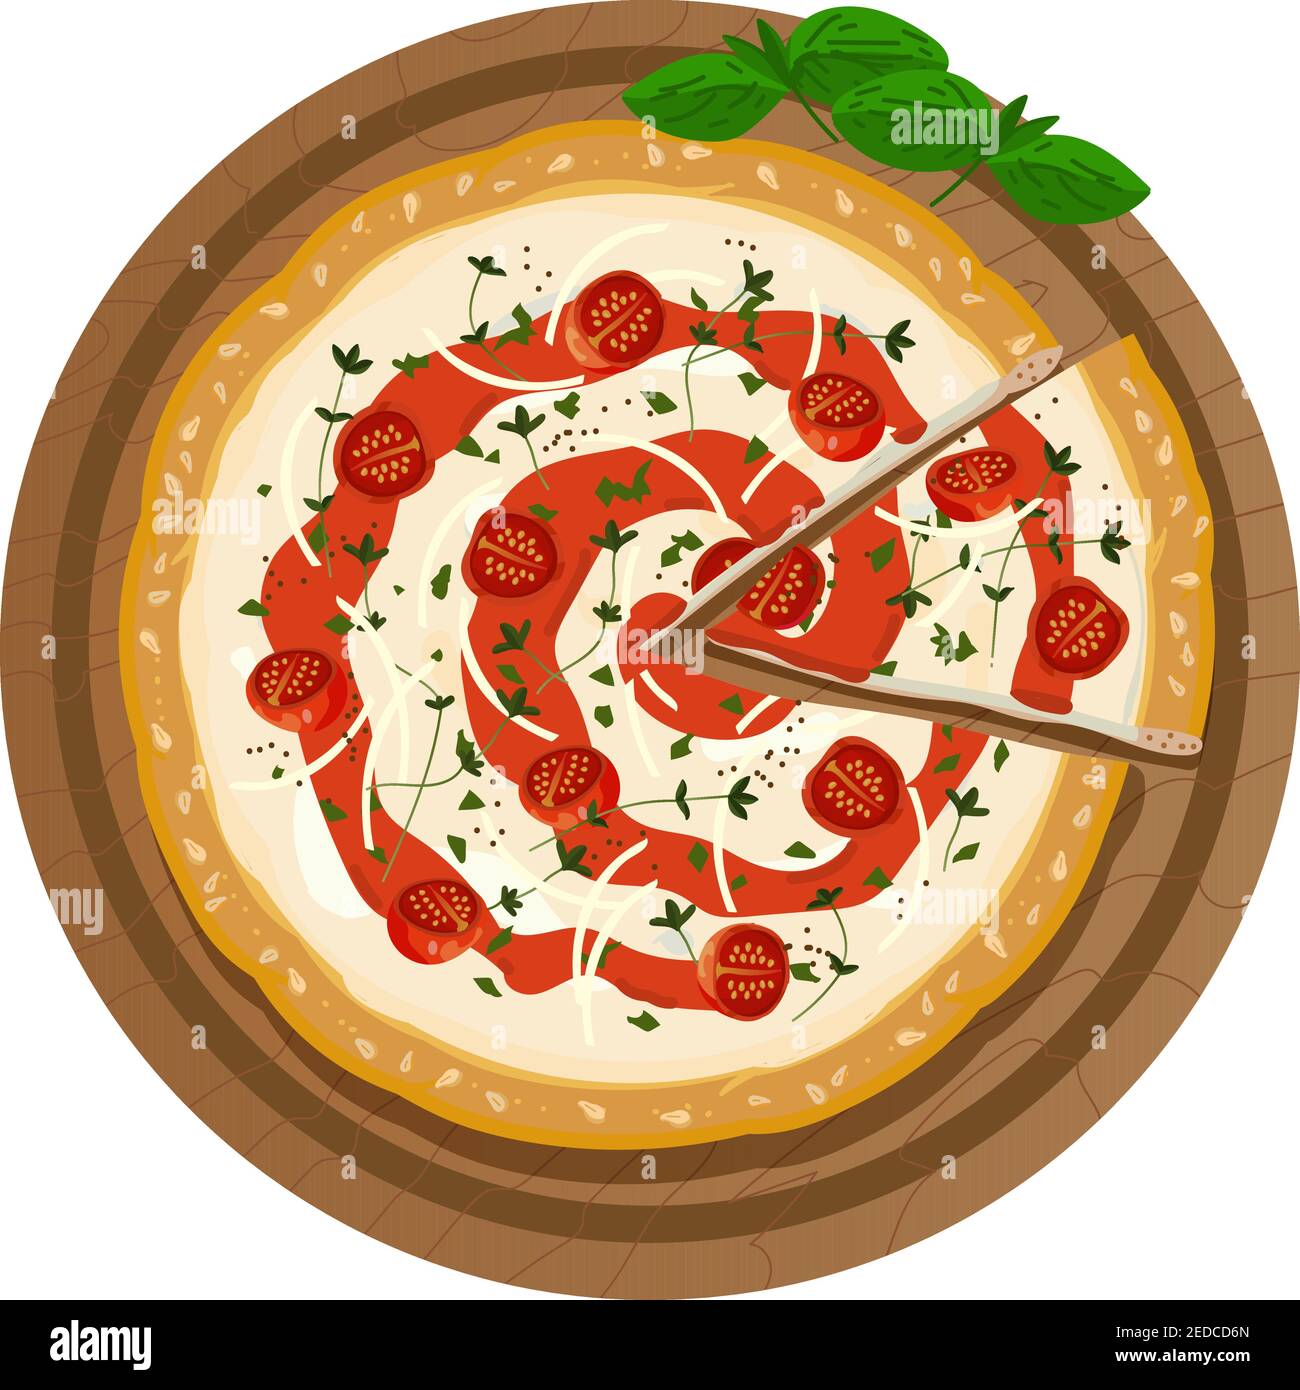 Pizza on a wooden plate with a cut slice. Served fresh pizza margarita with cheese, tomatoes, sauce, basil and sesame seeds on a crispy crust. Top vie Stock Vector